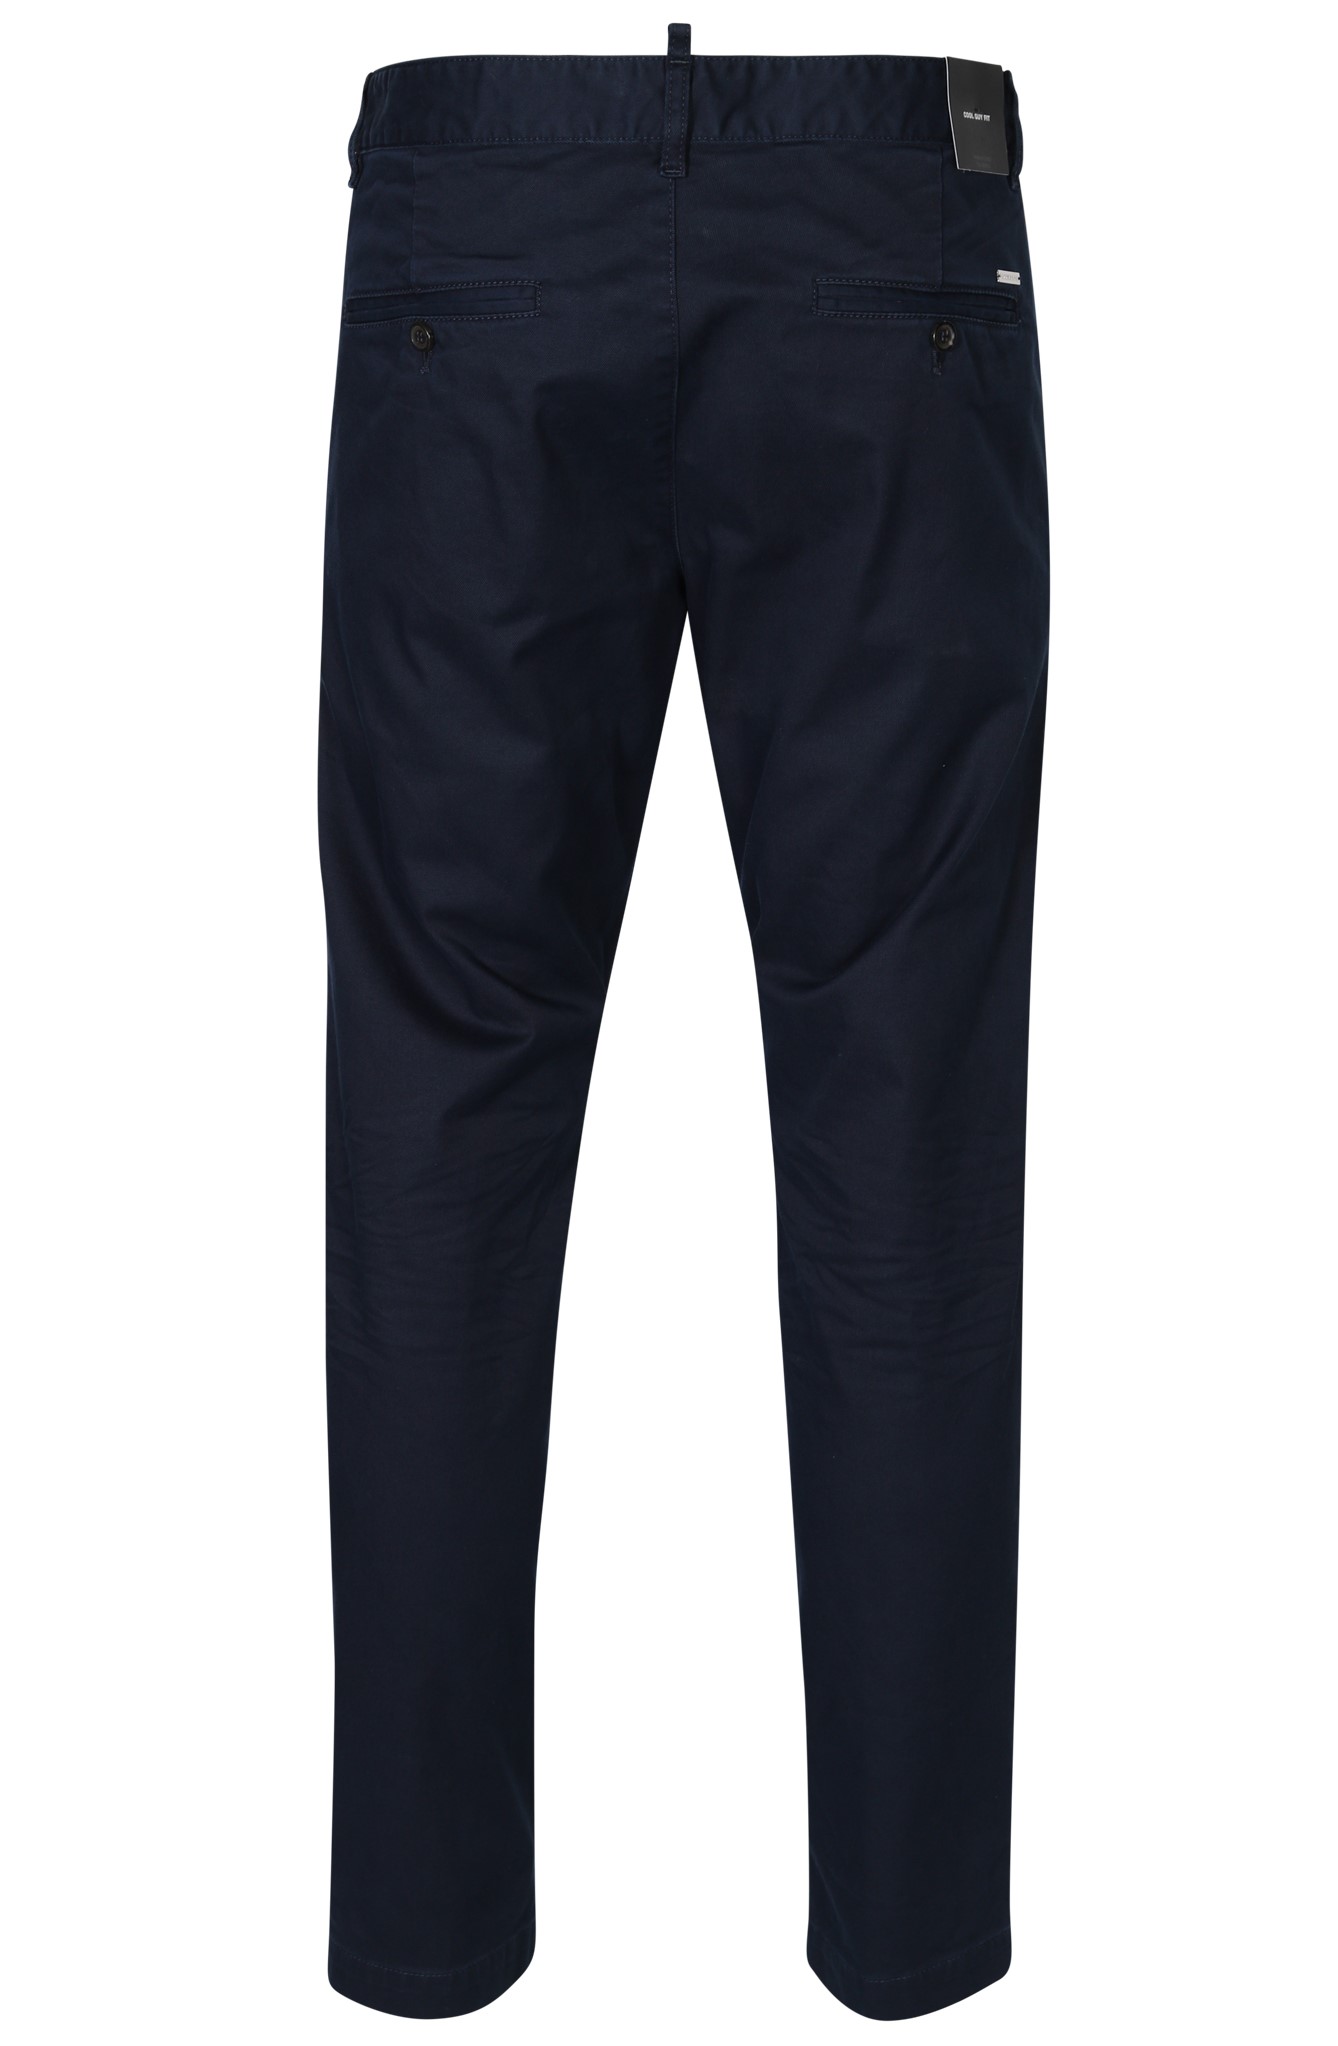 DSQUARED2 Cool Guy Chino Pant in Navy 46